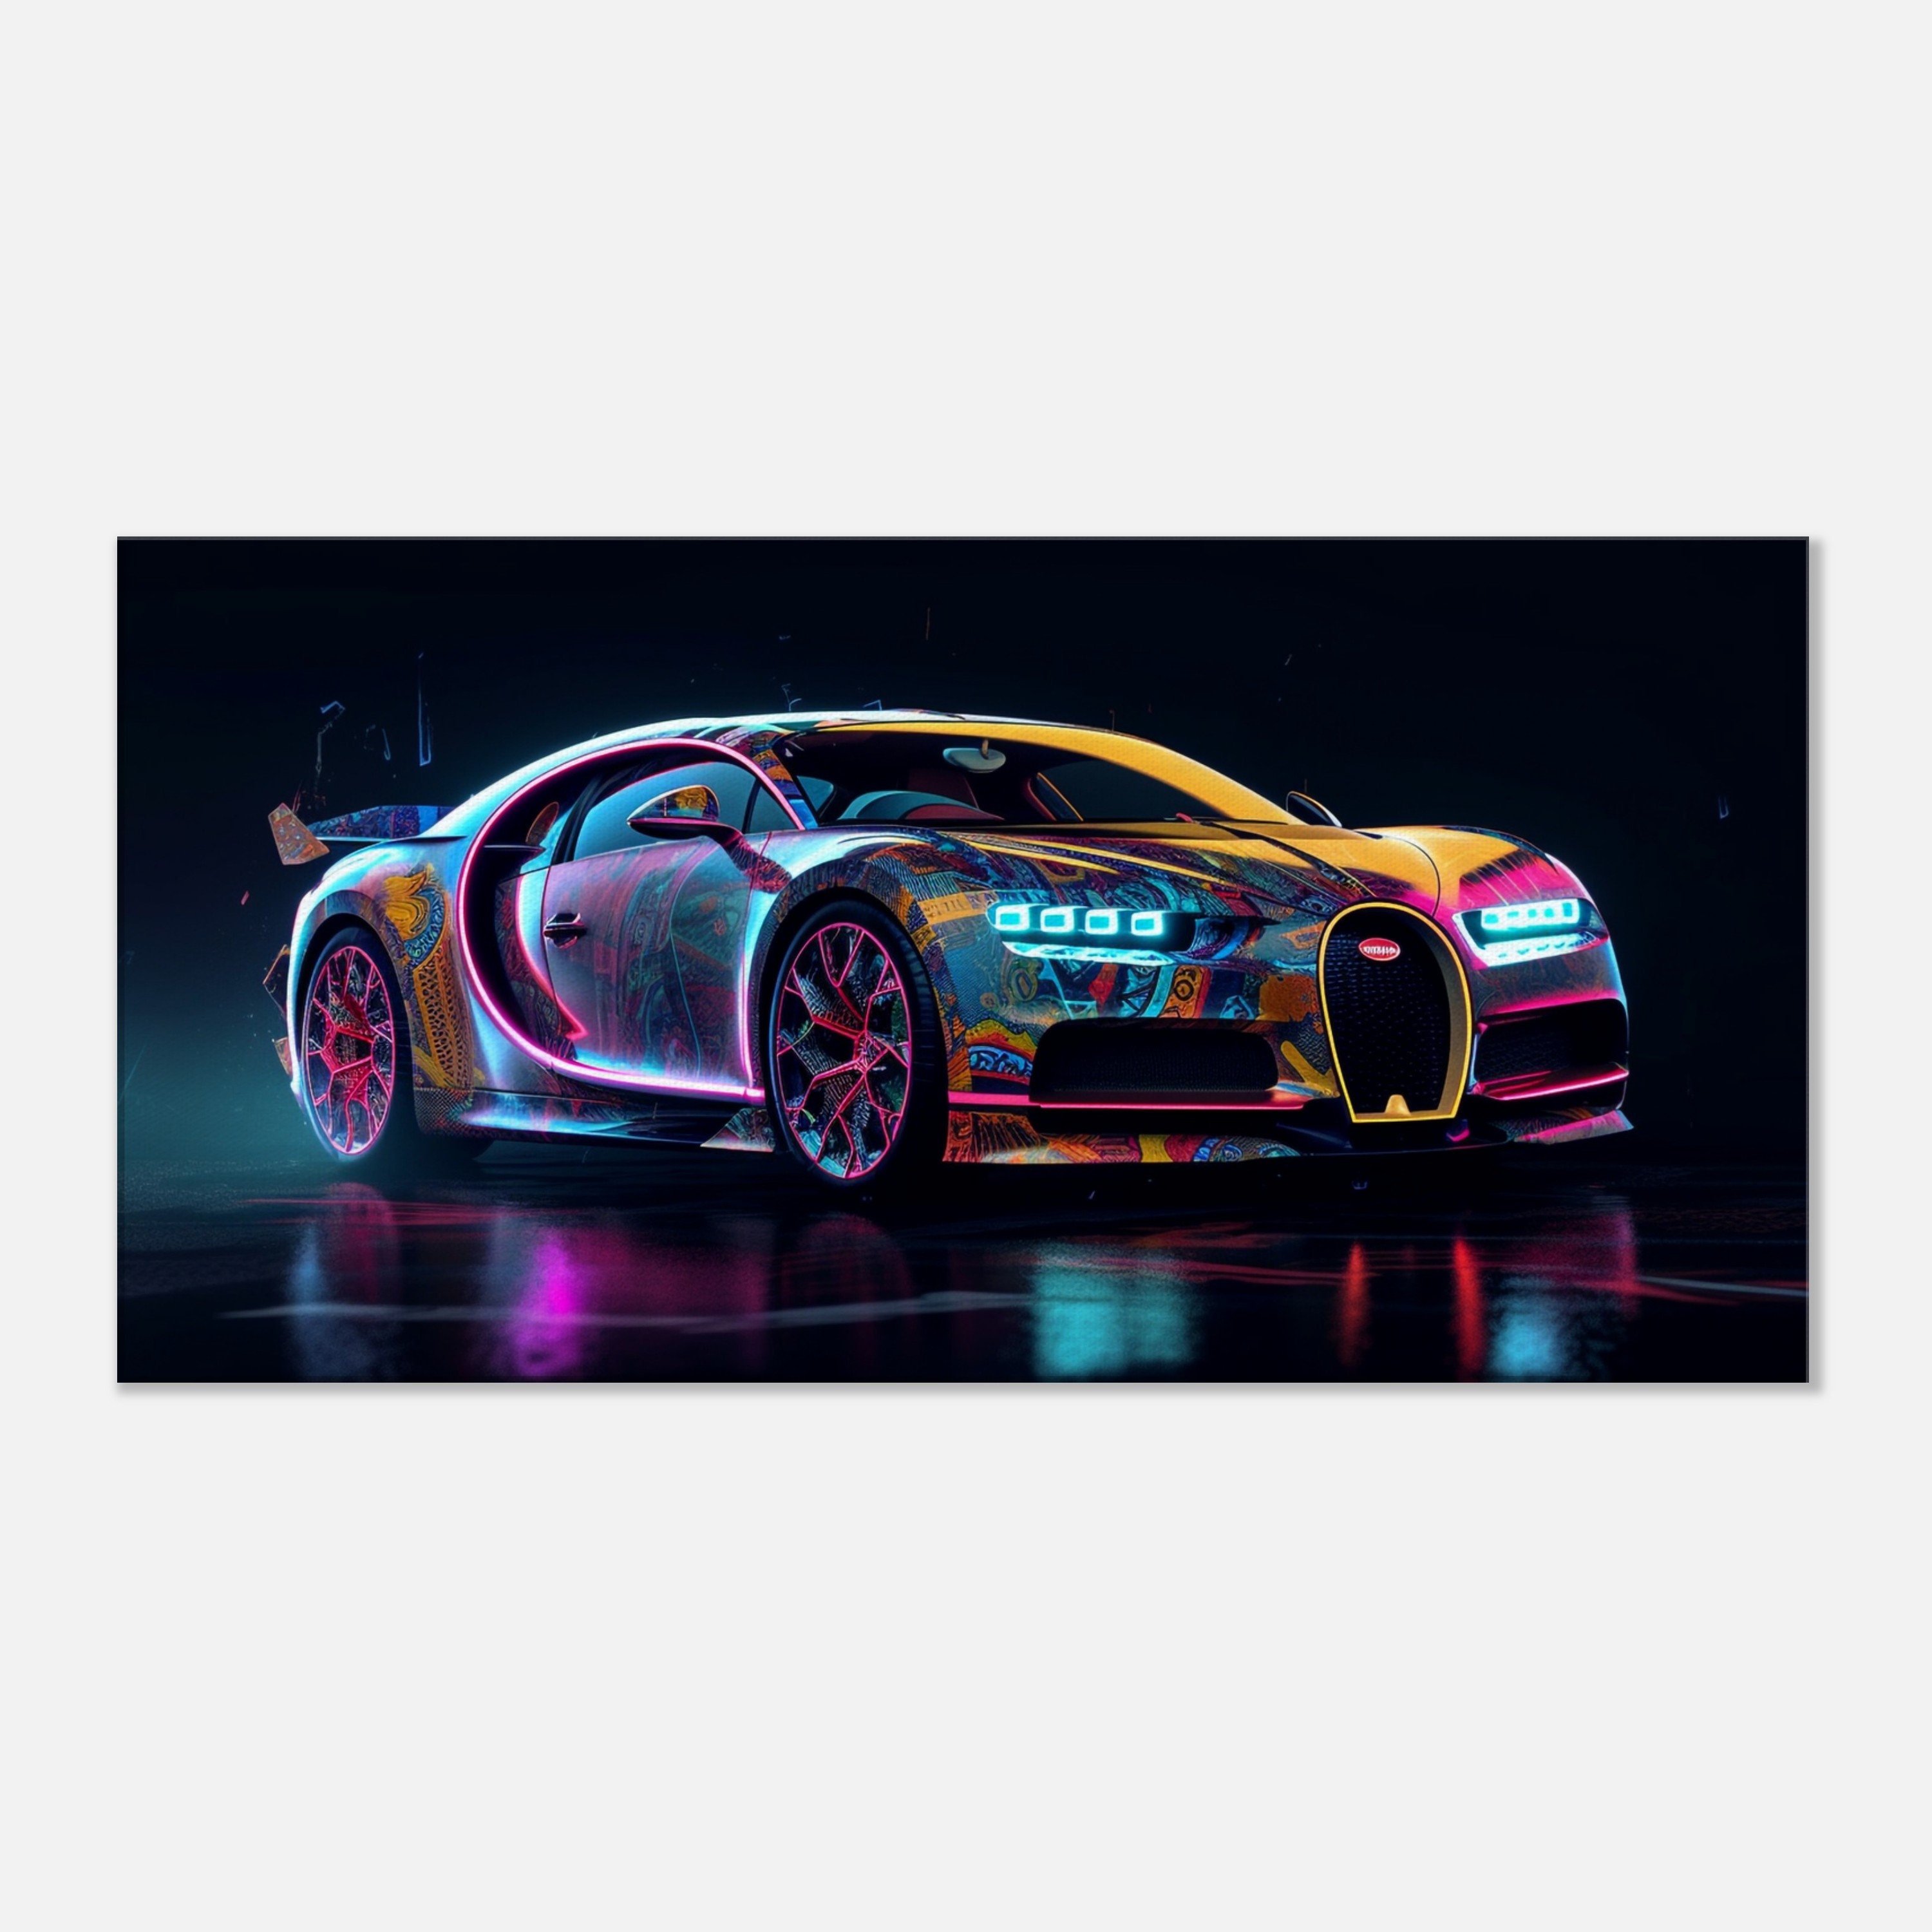 Bugatti Chiron Abstract Canvas Wall Art, Cool Neon Colors, Unique Art,  Modern Home Decor, Automotive Enthusiasts, Art Lovers, Luxury Car 